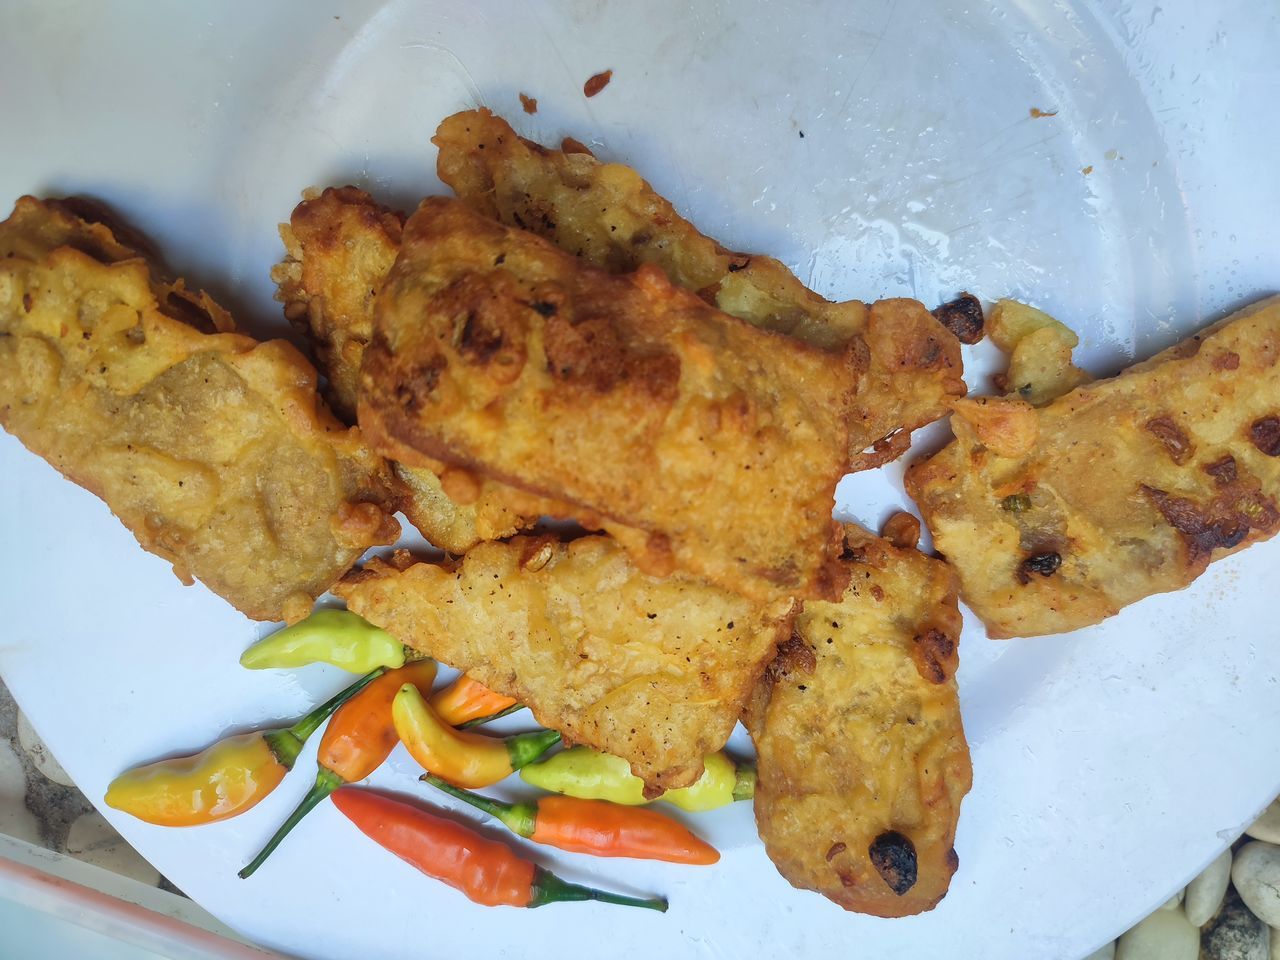 food, food and drink, fried food, dish, fish, freshness, fast food, produce, meal, cuisine, plate, no people, meat, healthy eating, high angle view, wellbeing, vegetable, serving size, indoors, indian food, close-up, pakora